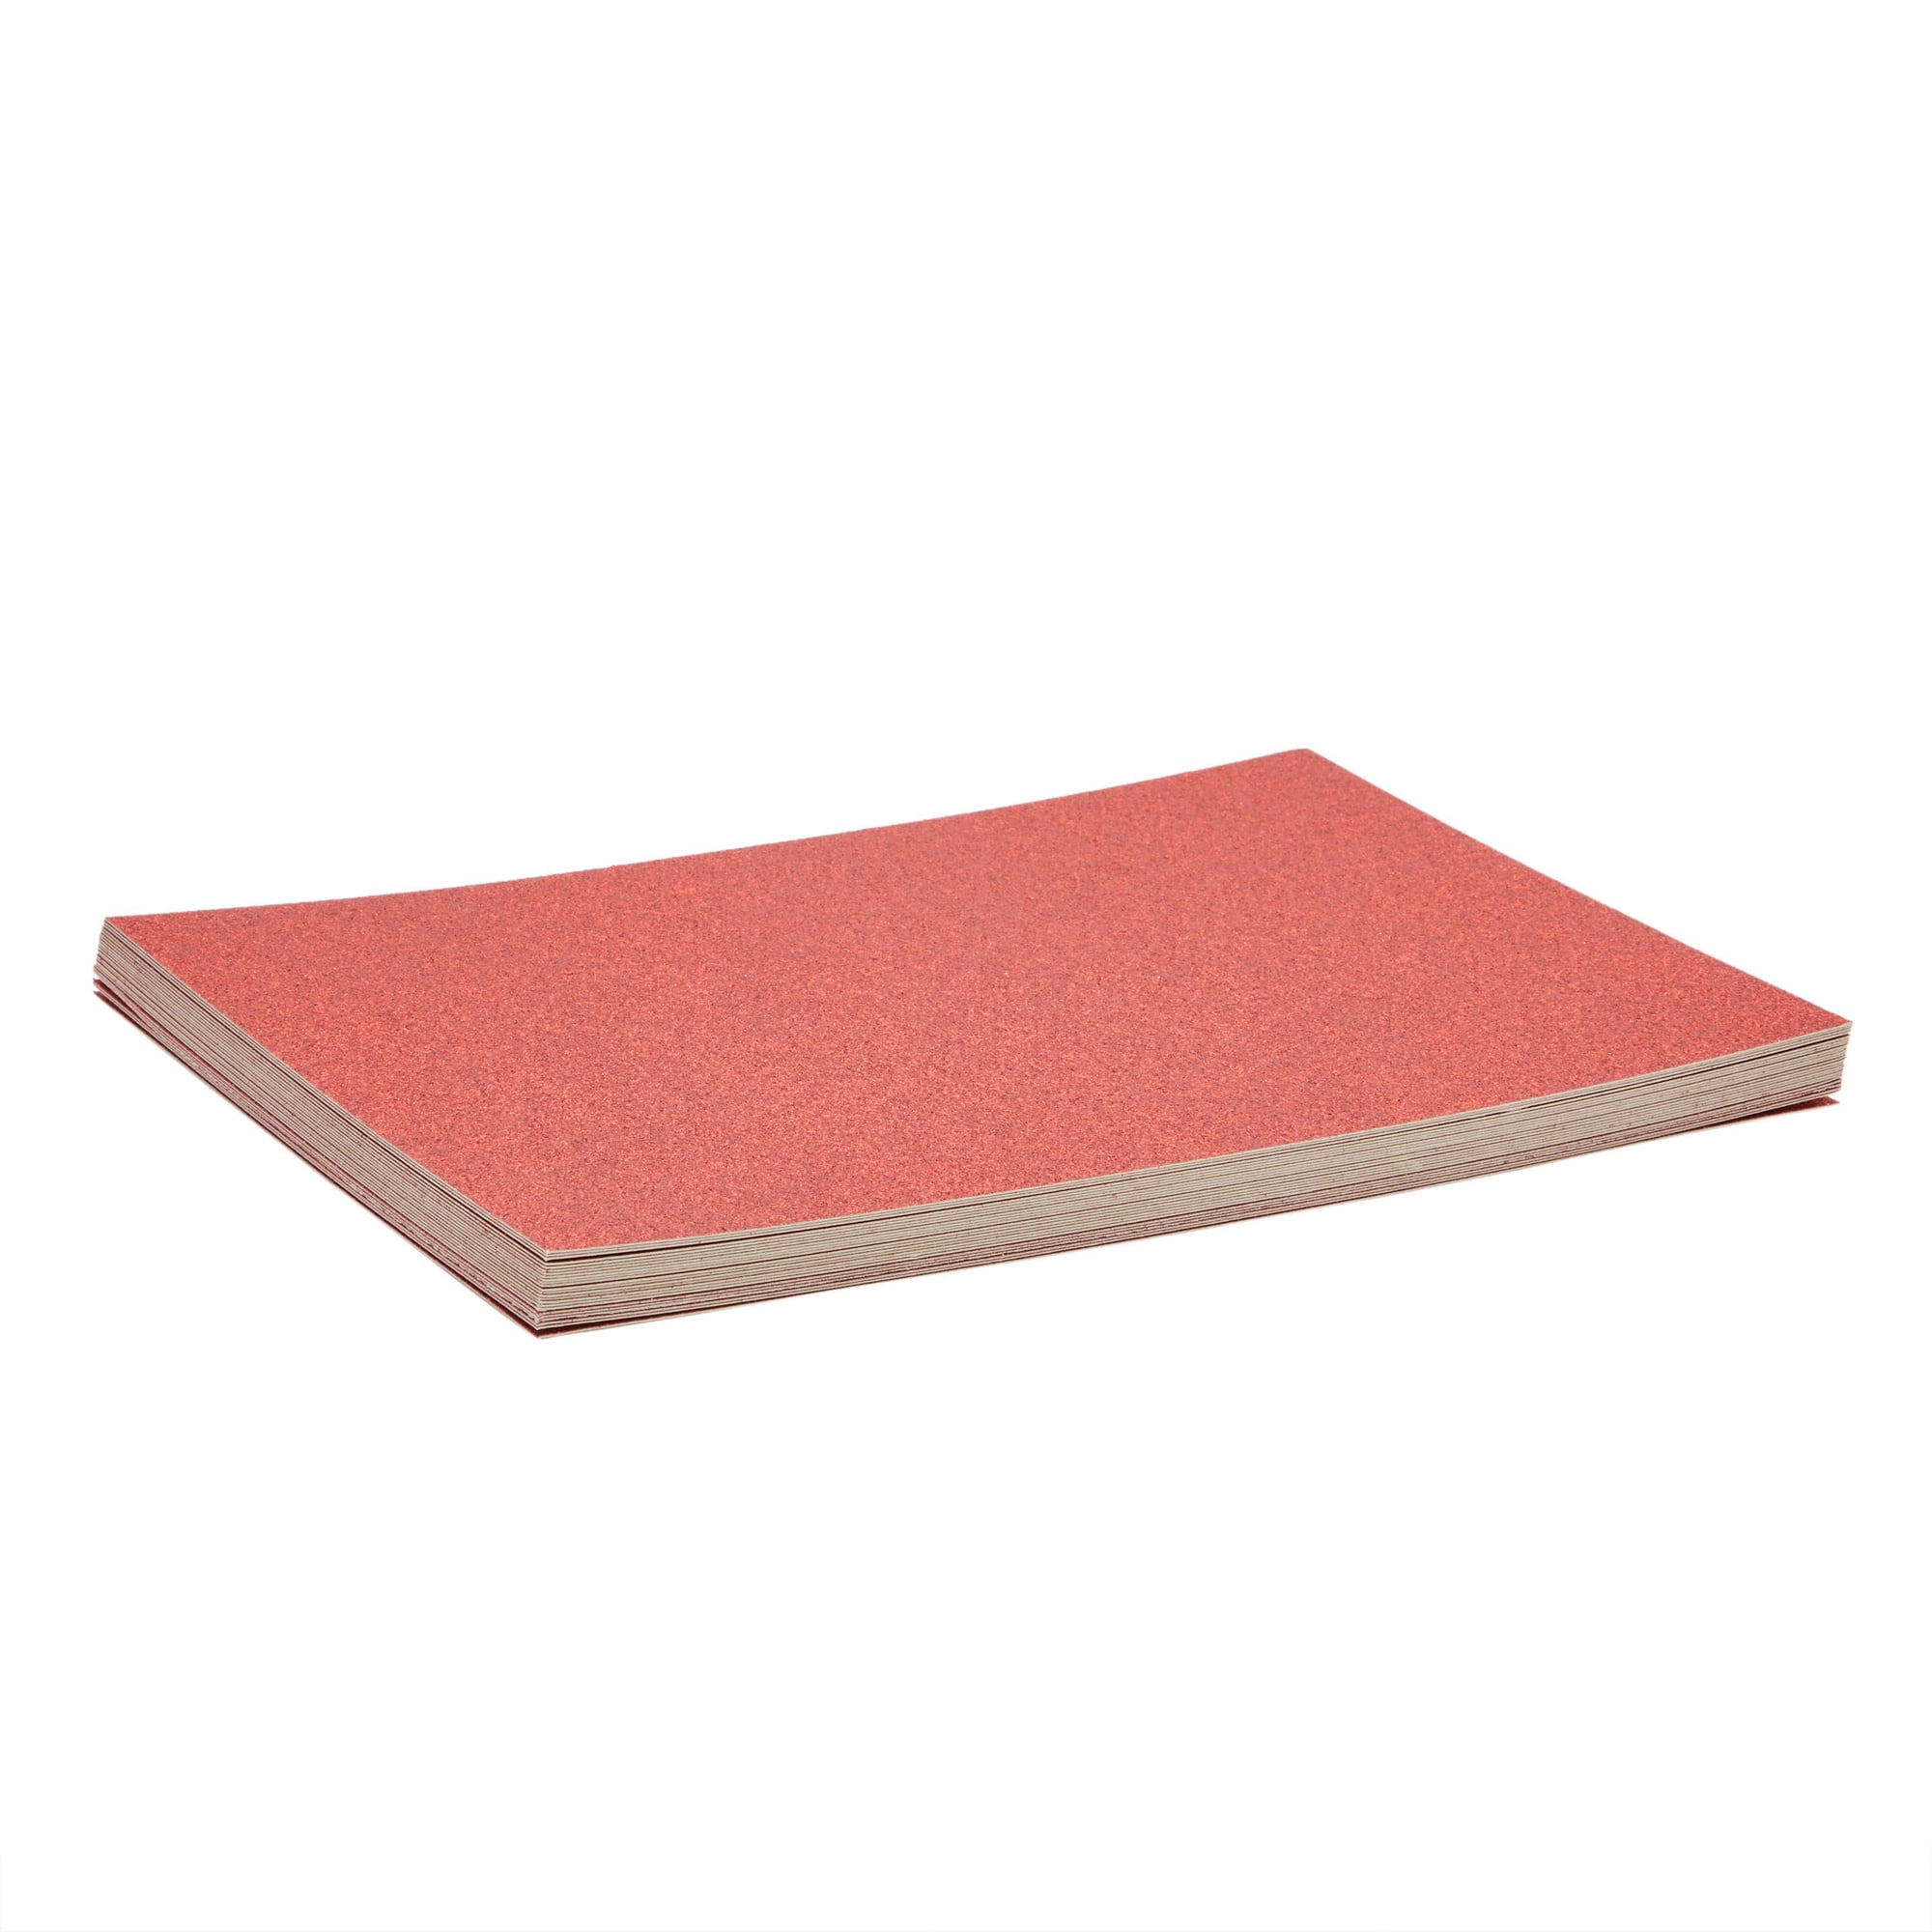  Cardstock Warehouse Lessebo Cherry (Previously Candy Apple)  Red Matte Premium Cardstock Paper - 8.5 x 11 - 83 Lb. / 225 Gsm - 50  Sheets : Arts, Crafts & Sewing